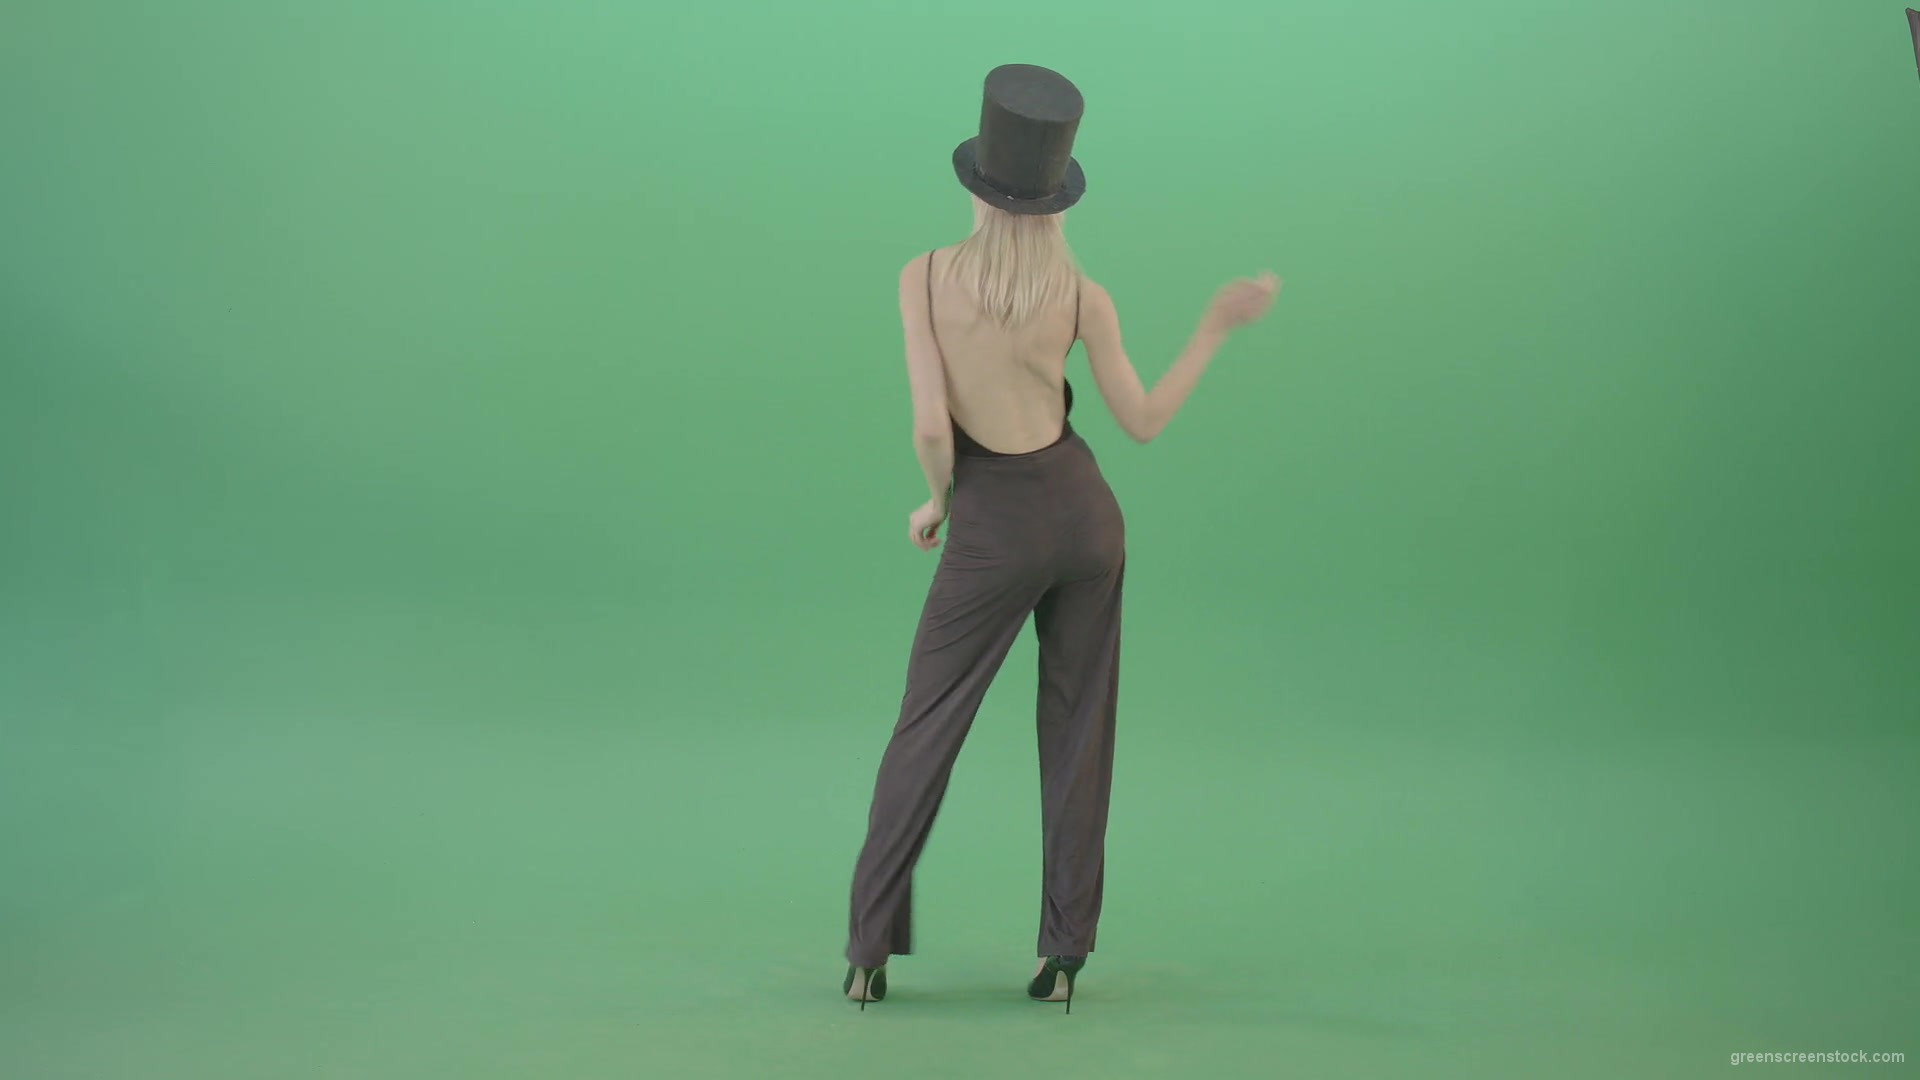 Girl-with-black-busines-cylinder-hat-dancing-isolated-on-green-background-4K-Video-Footage-1920_007 Green Screen Stock